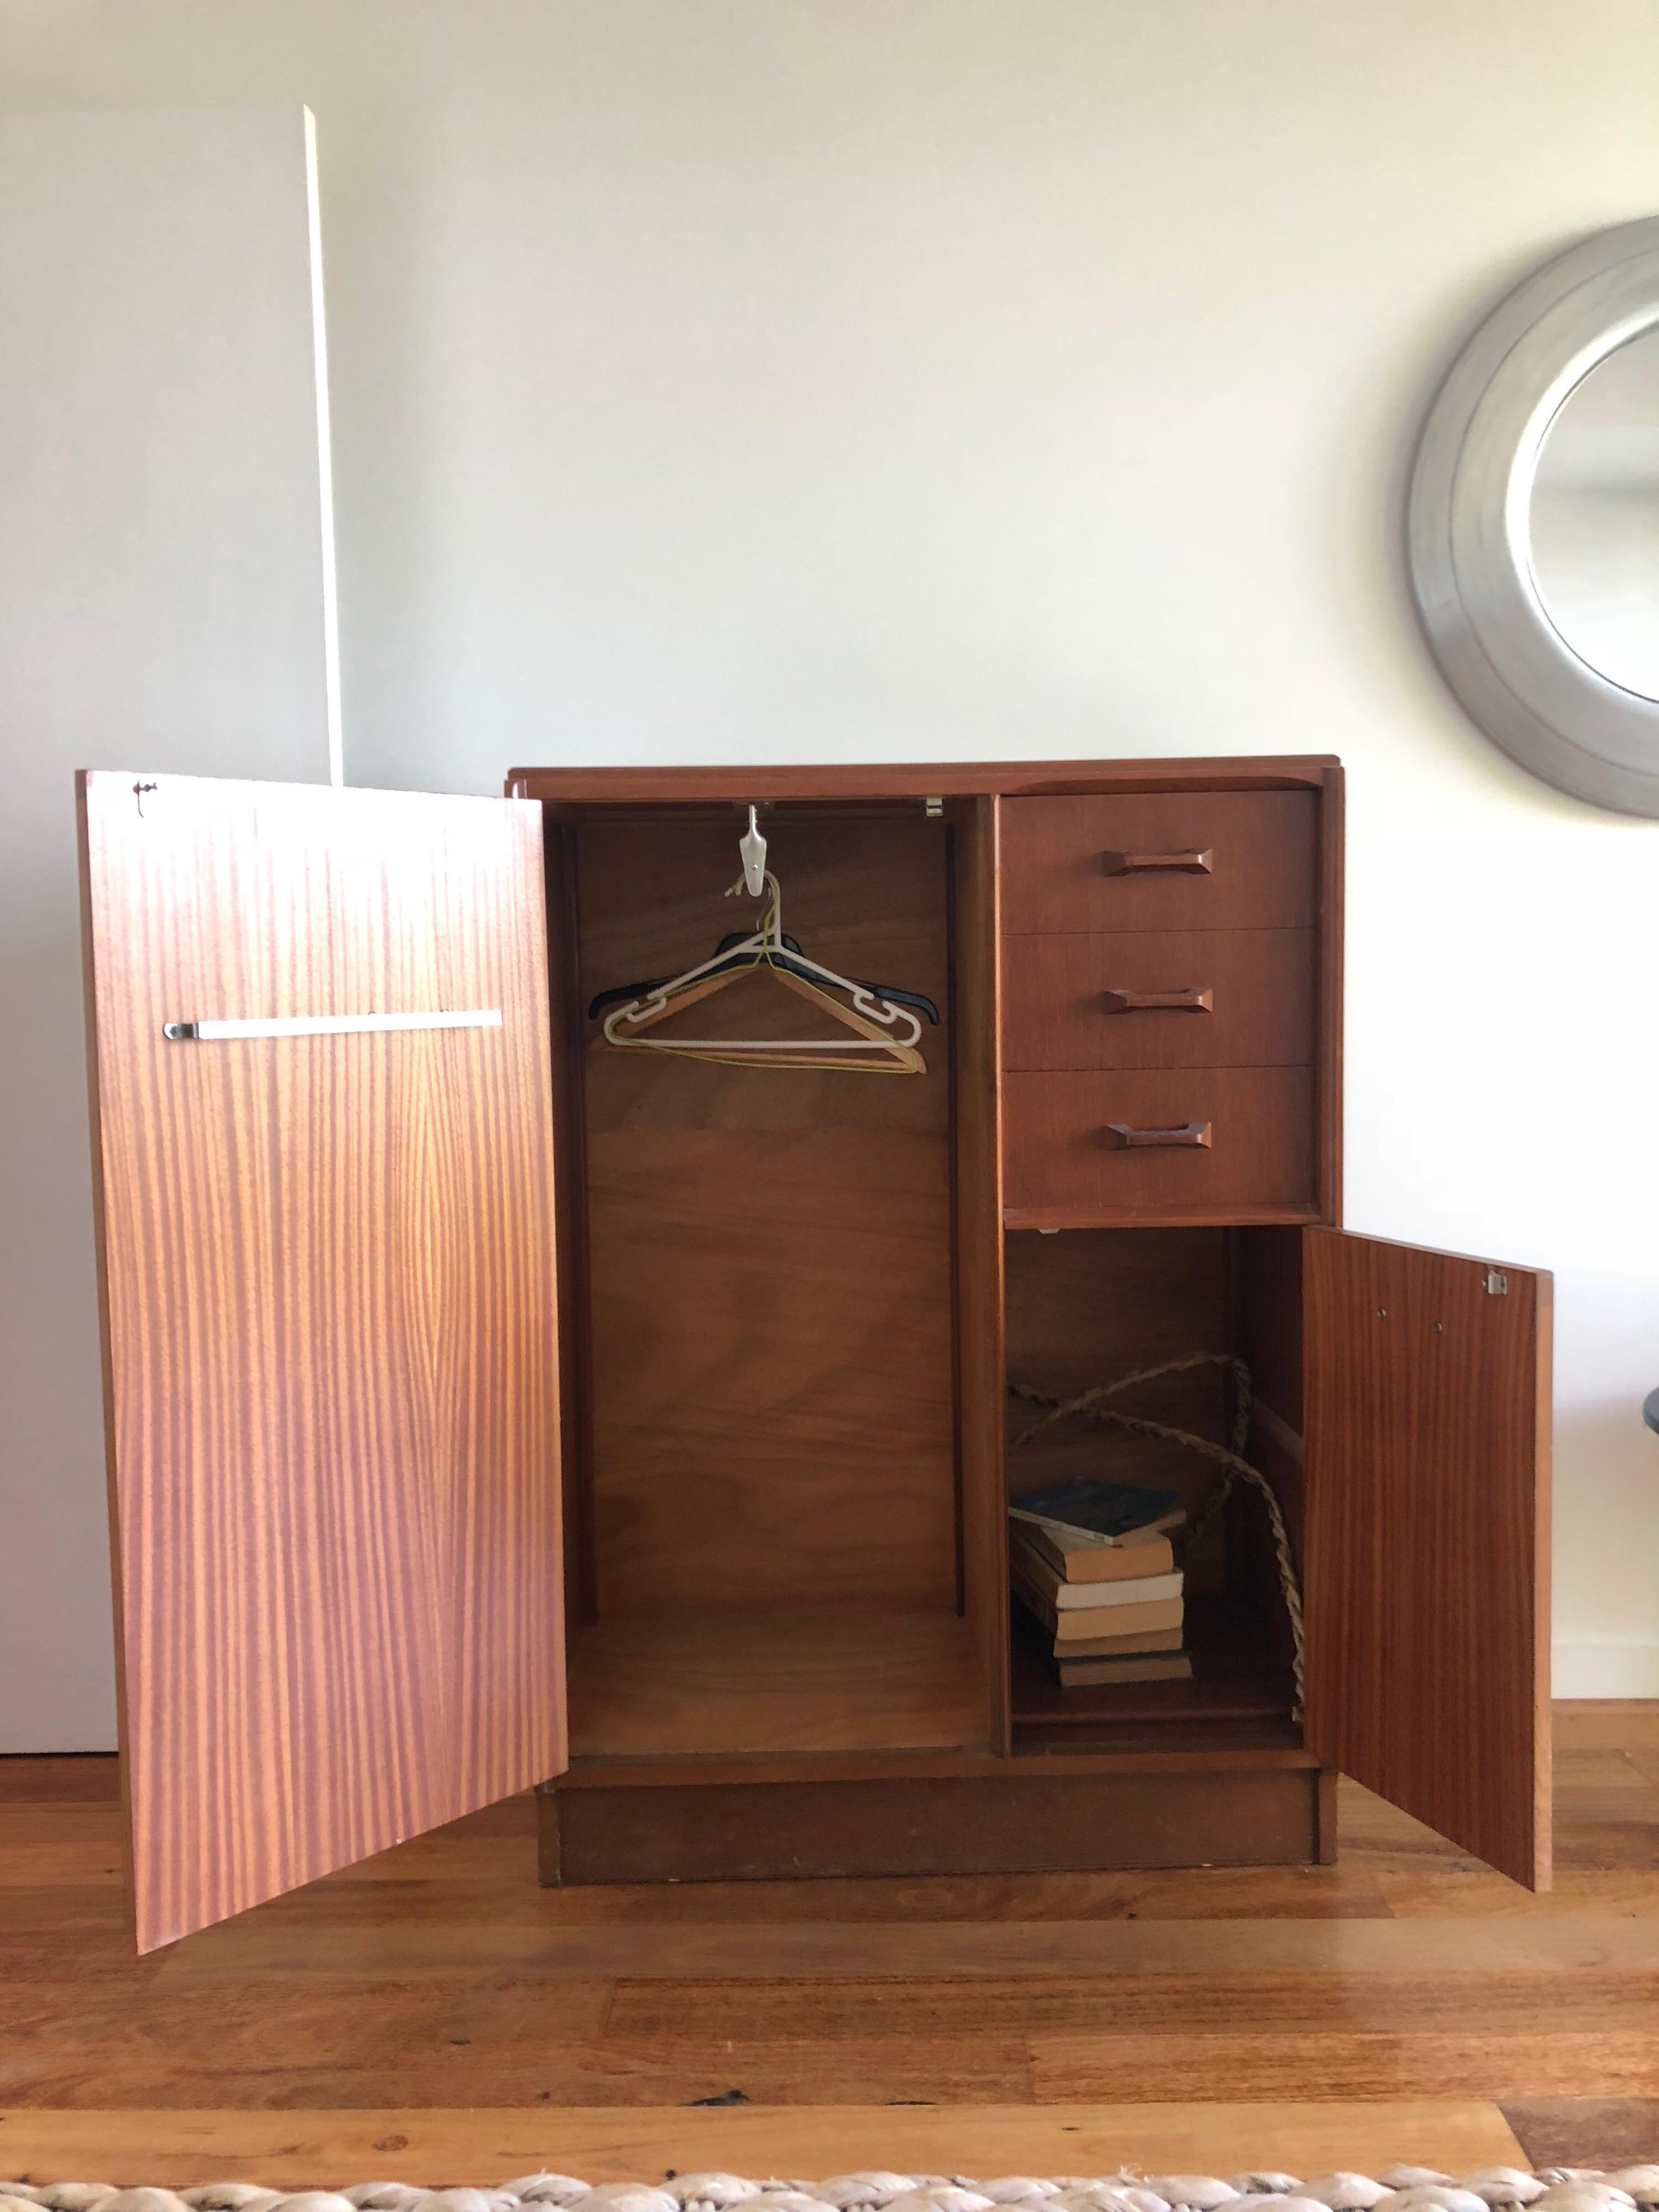 G Plan teak gents robe
E Gomme gold embossed stamp to door interior.
Early G plan stamp used 1952 to 1965
Geometric form handles and rounded corners reflecting iconic midcentury lines
Hanging space, drawers and storage compartment.